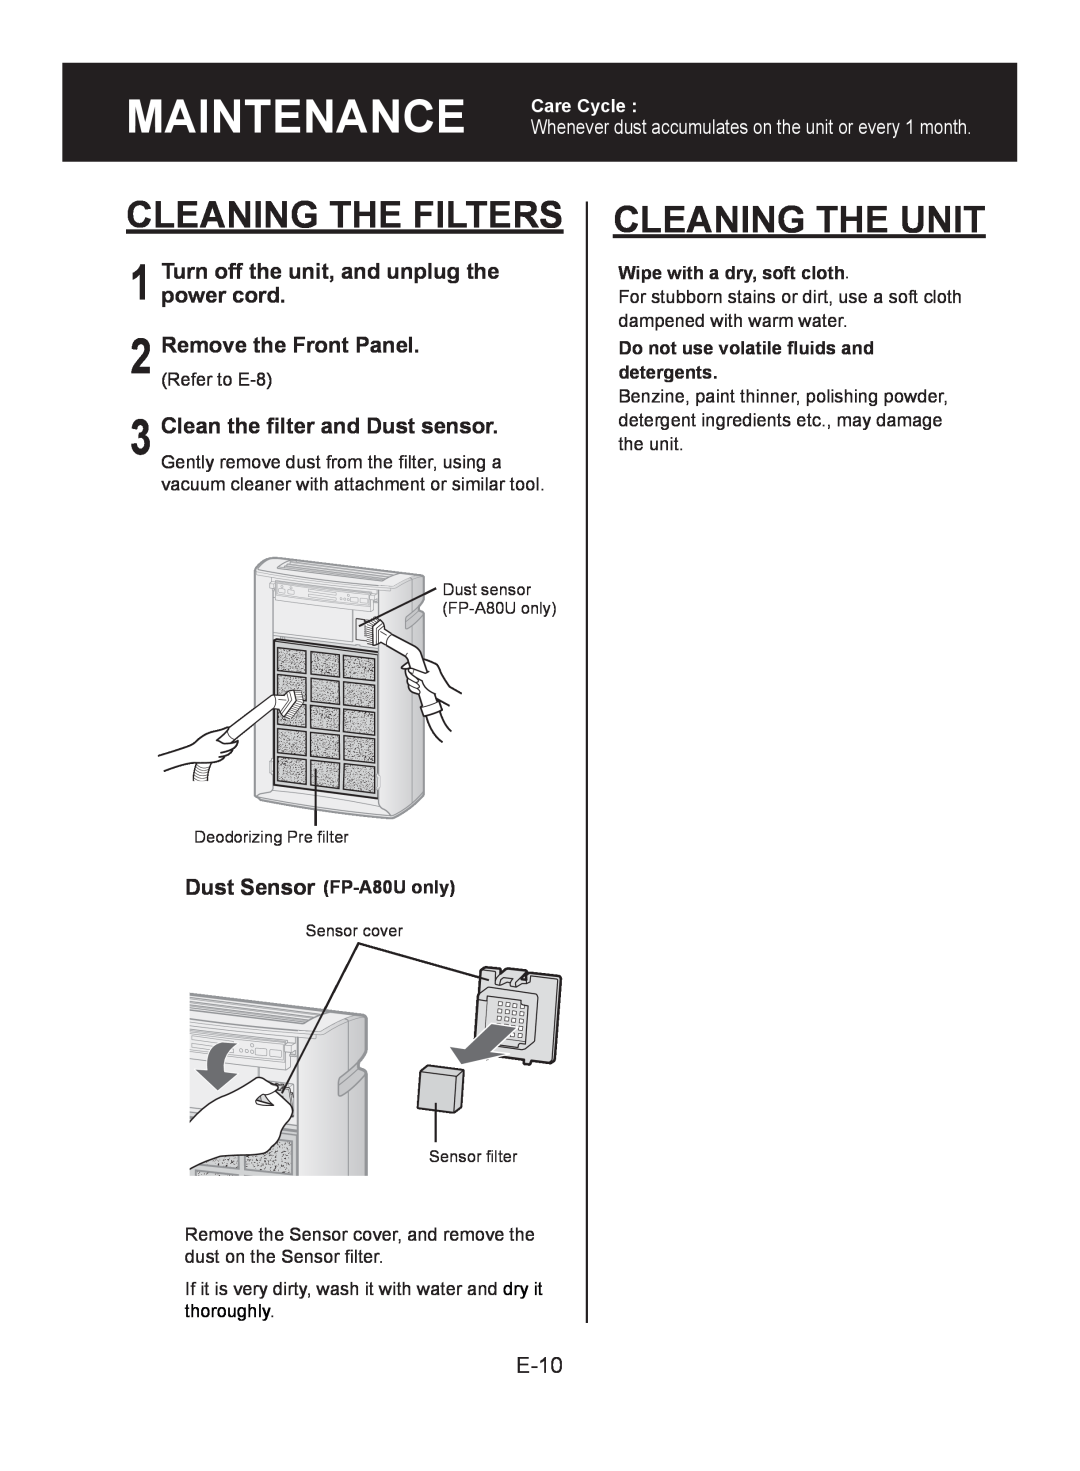 Sharp FP-A60U, FP-A80U MAINTENANCE Care Cycle, Cleaning The Filters, Cleaning The Unit, Remove the Front Panel, E-10 